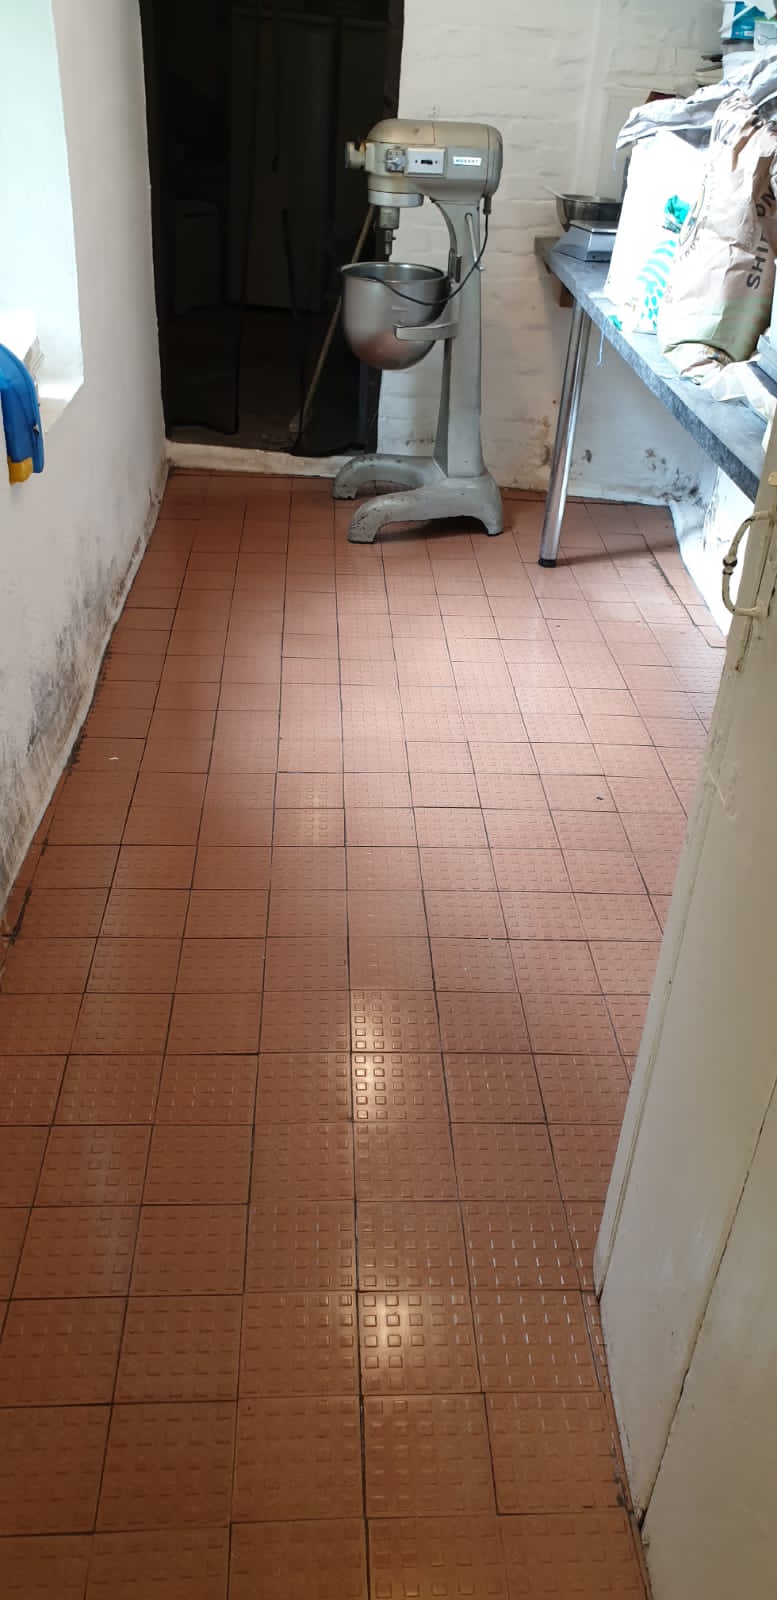 Cleaned hard floor in commercial kitchen